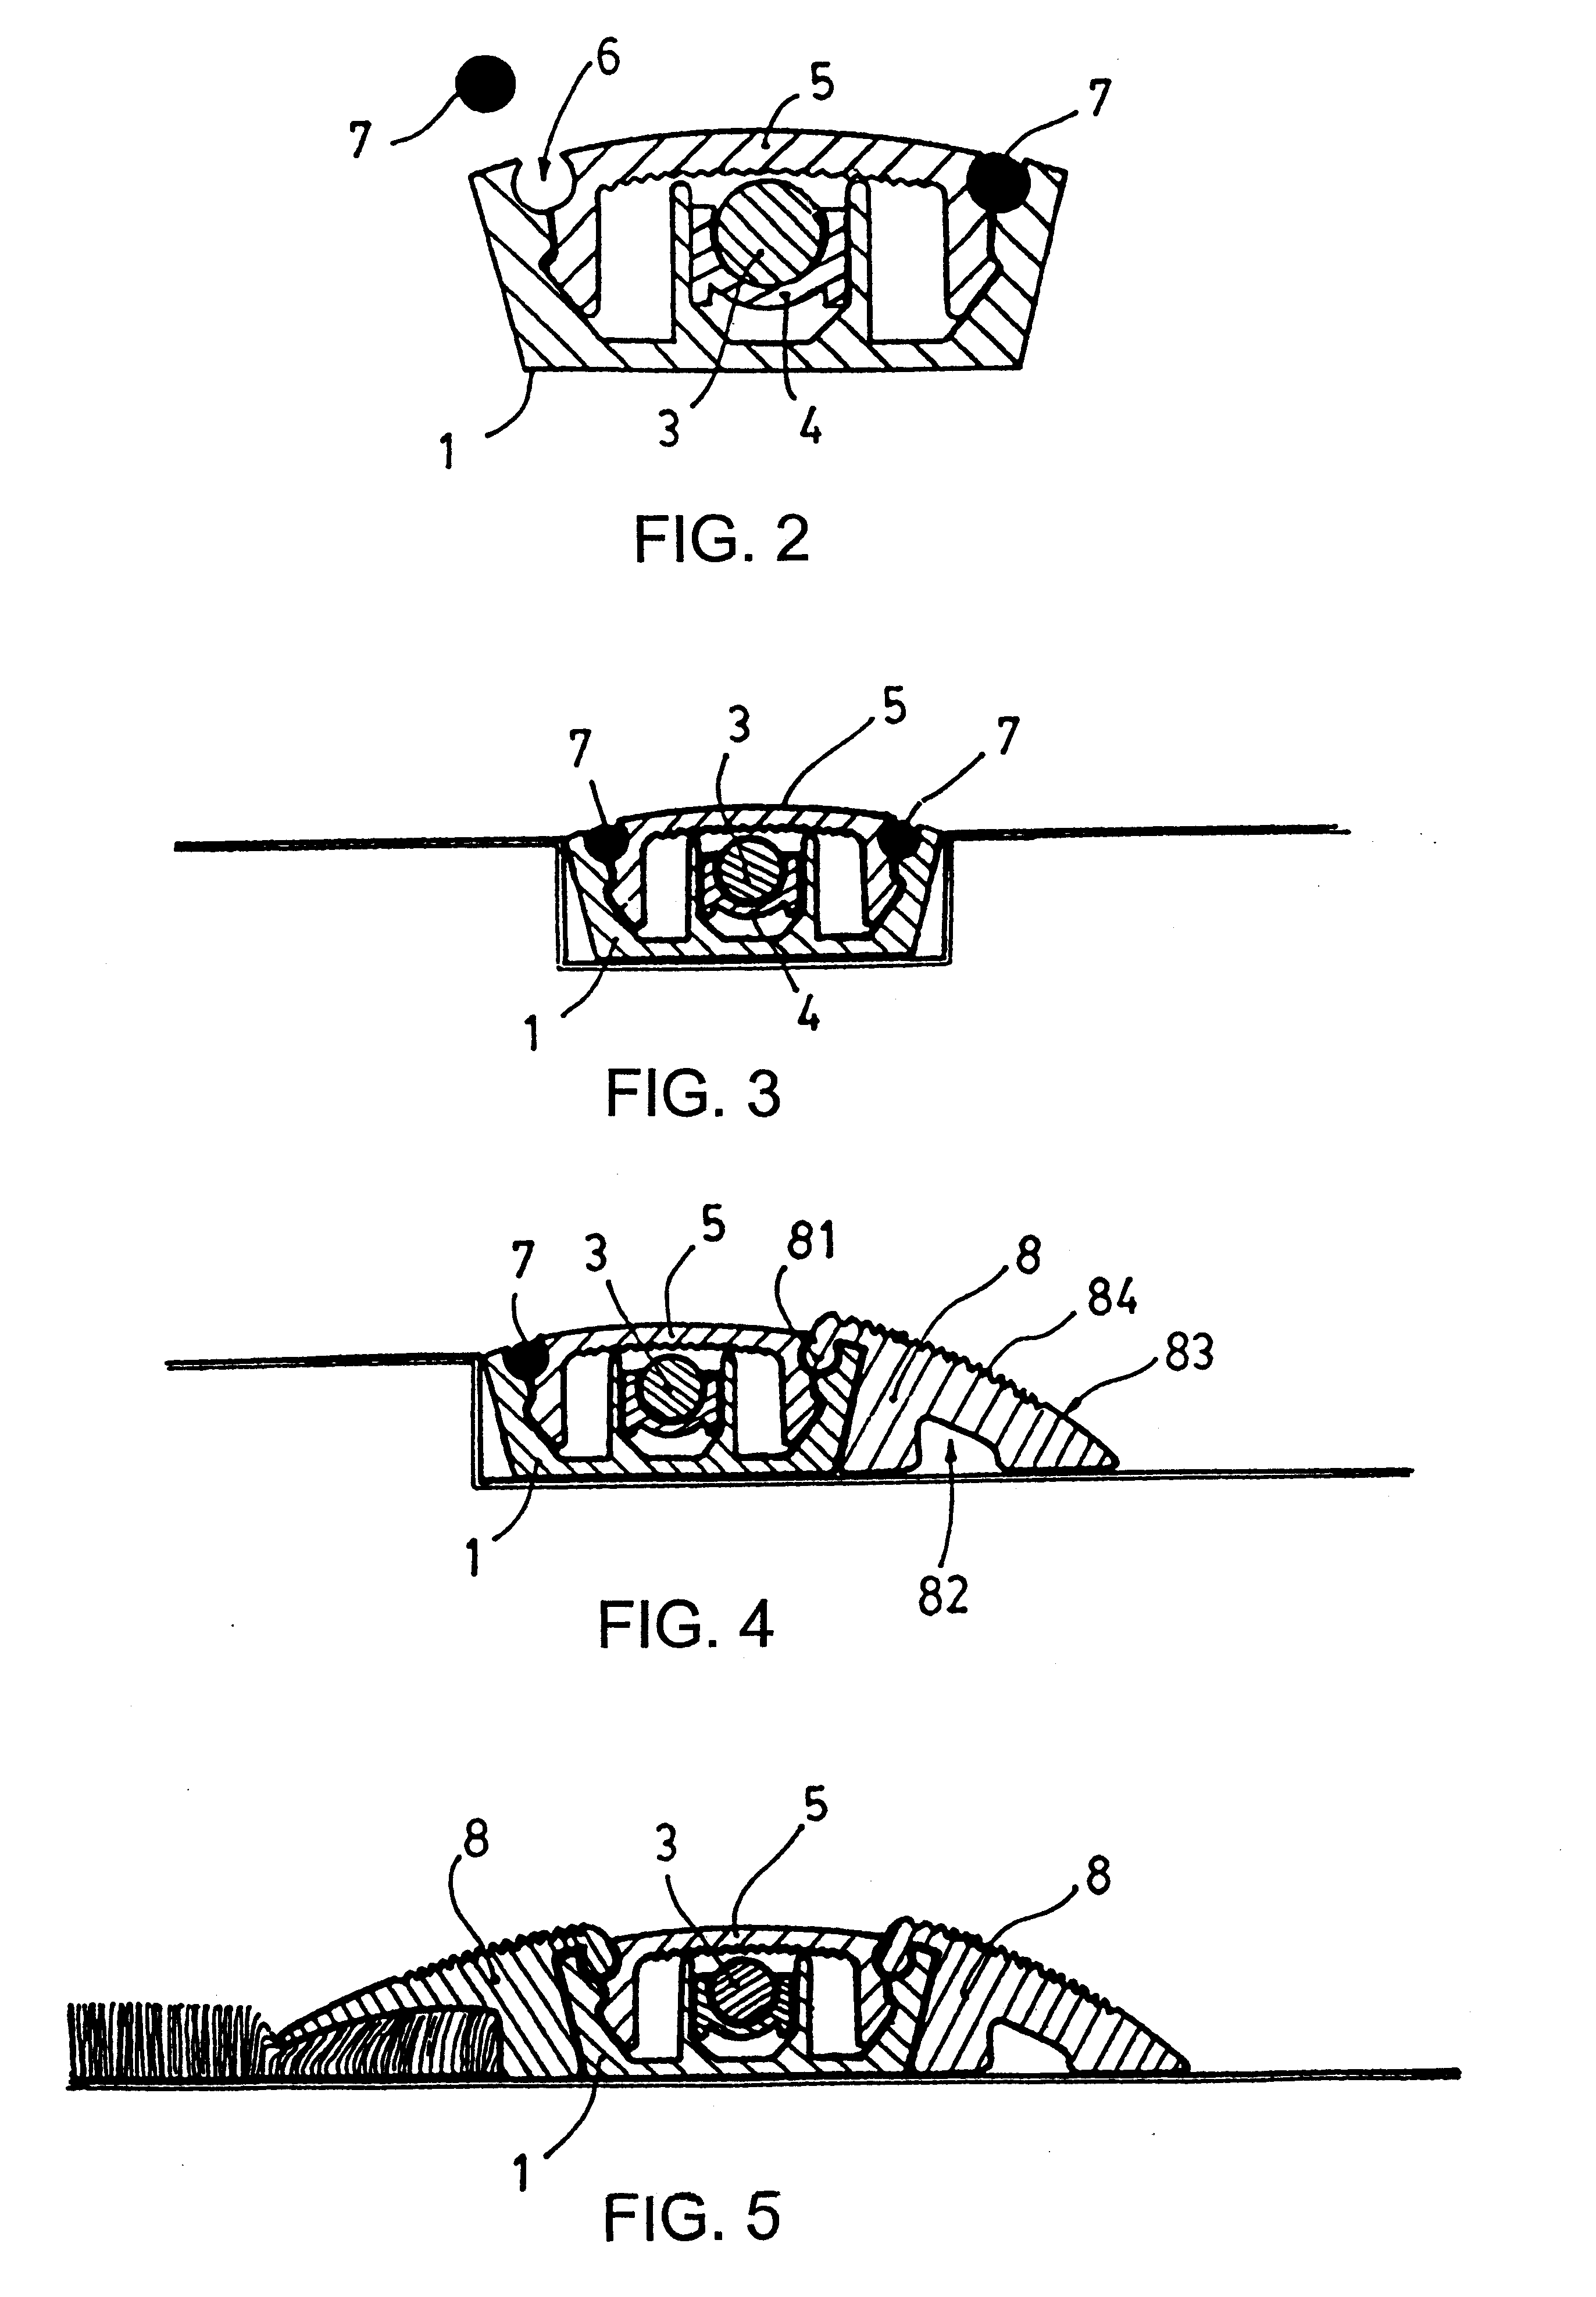 Light signaling device for floors